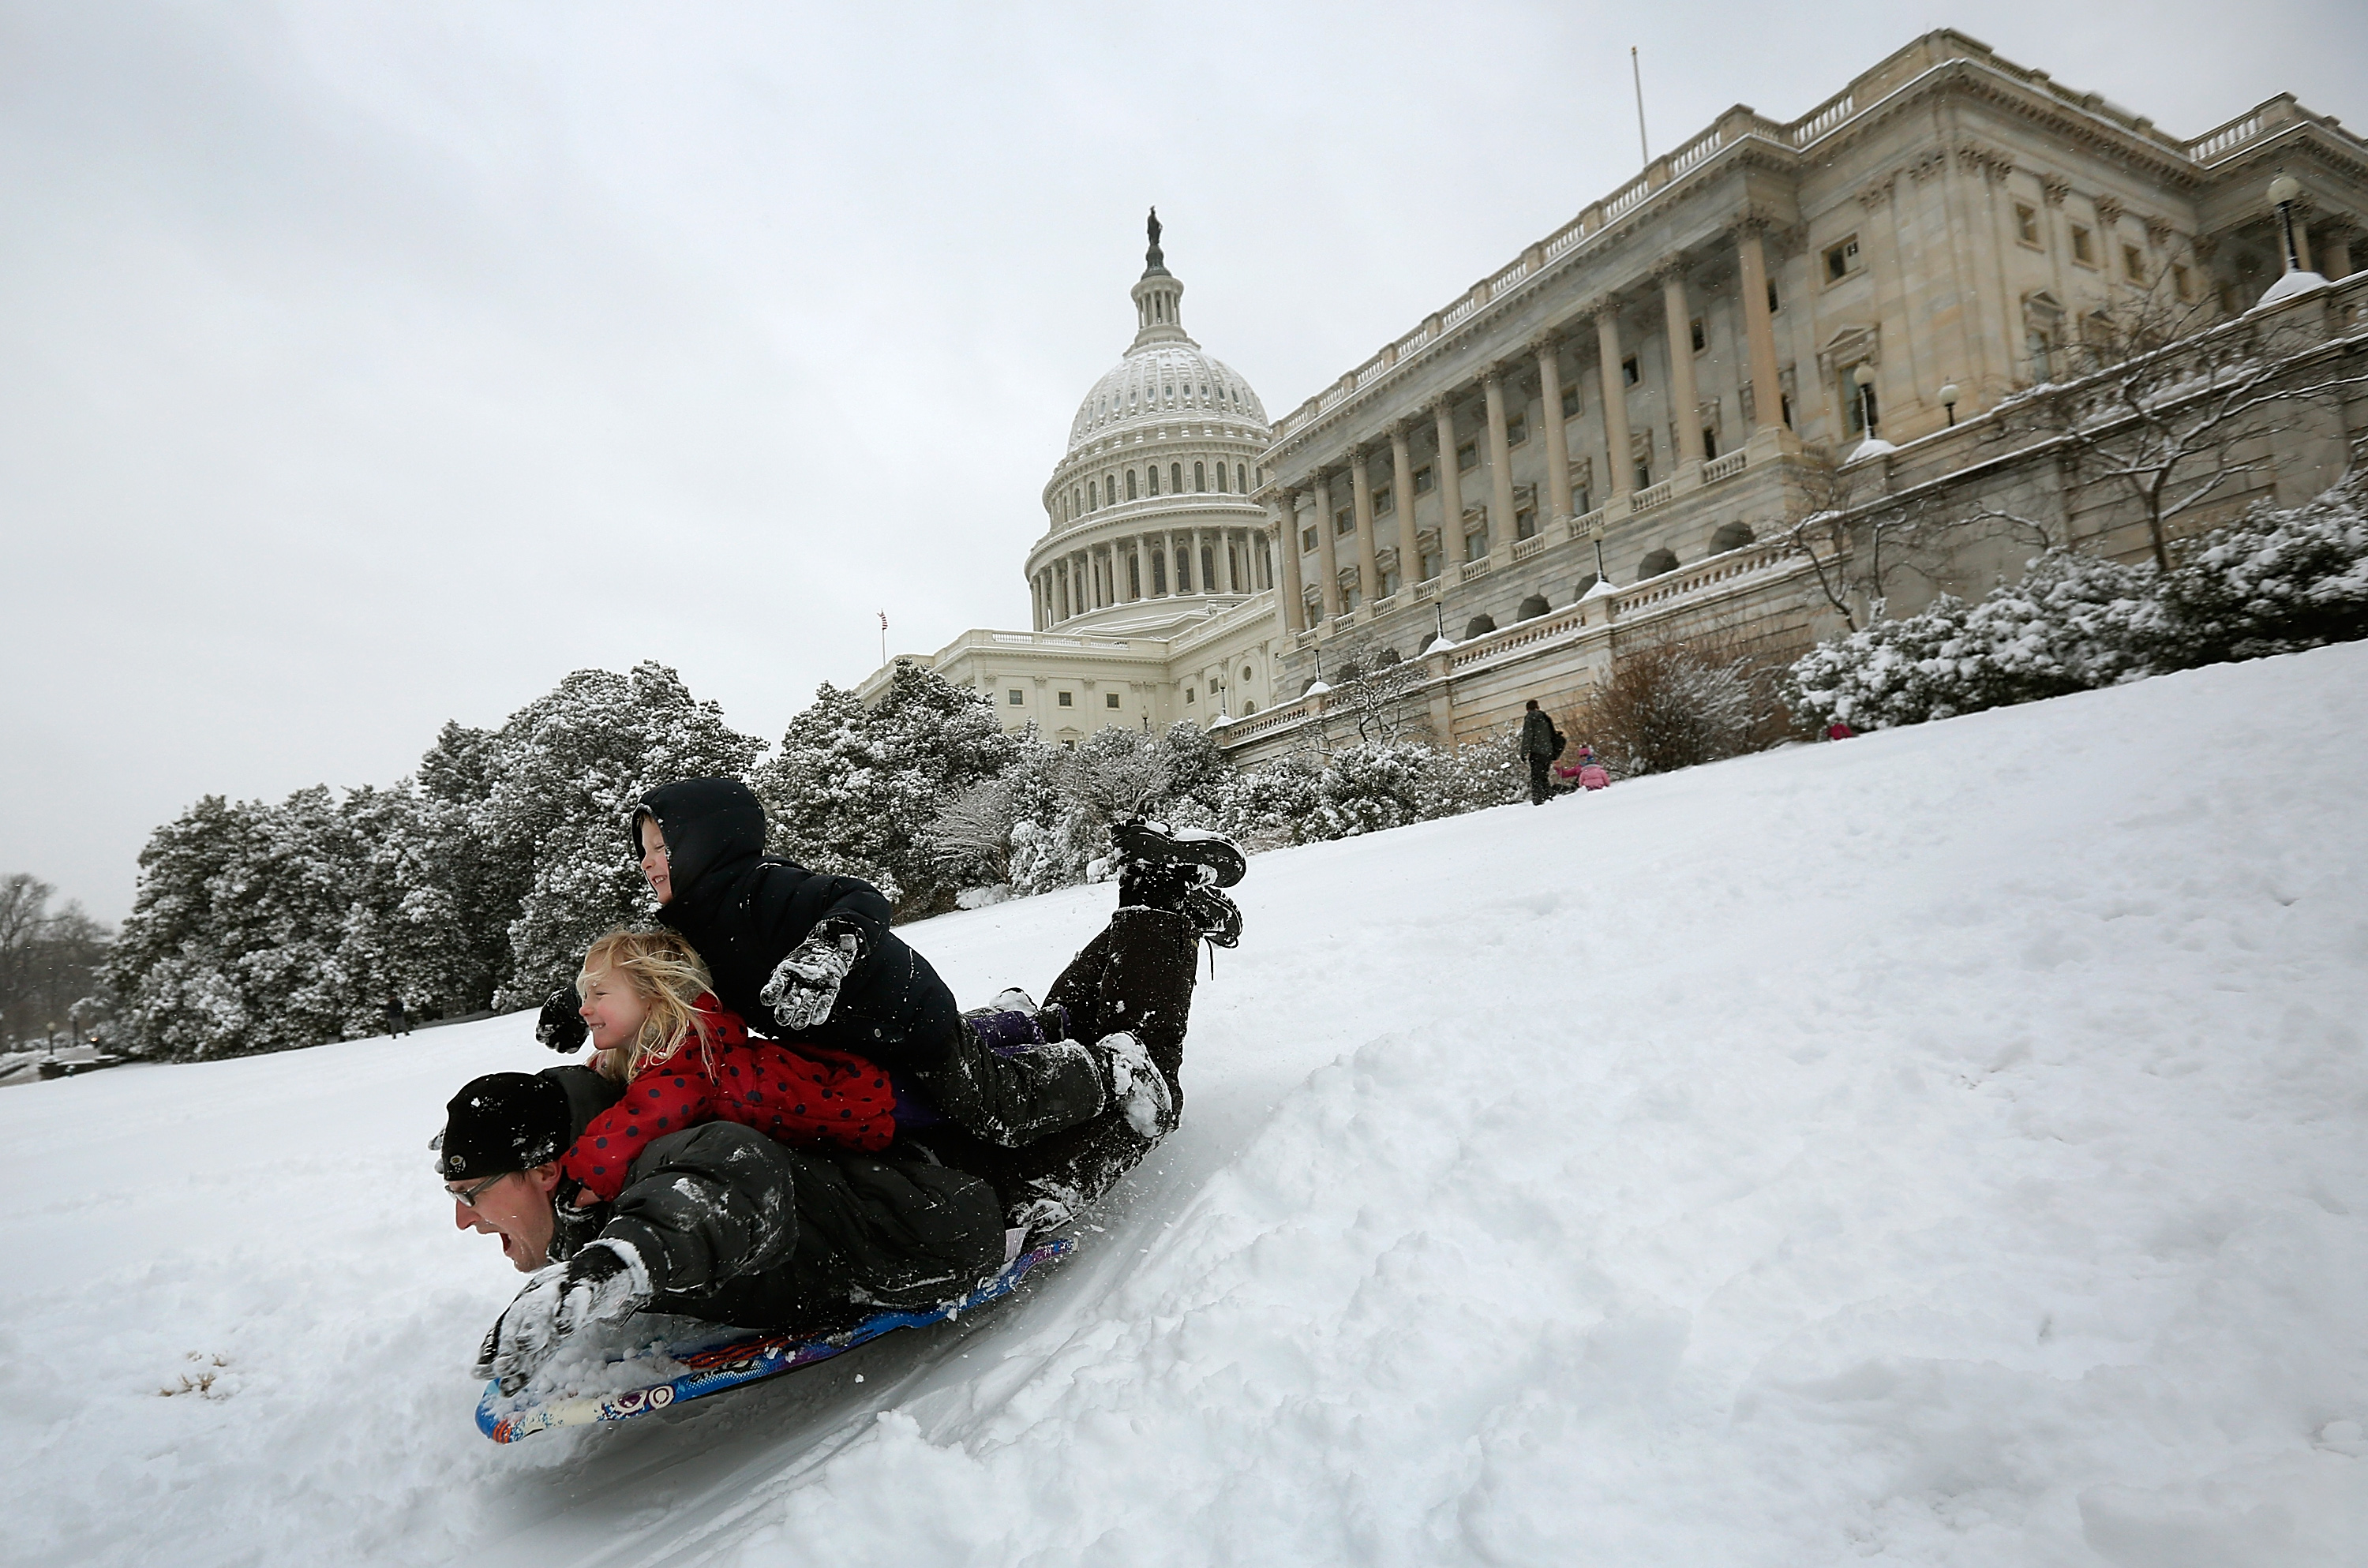 Washington DC Area Hit With Mid-March Snow